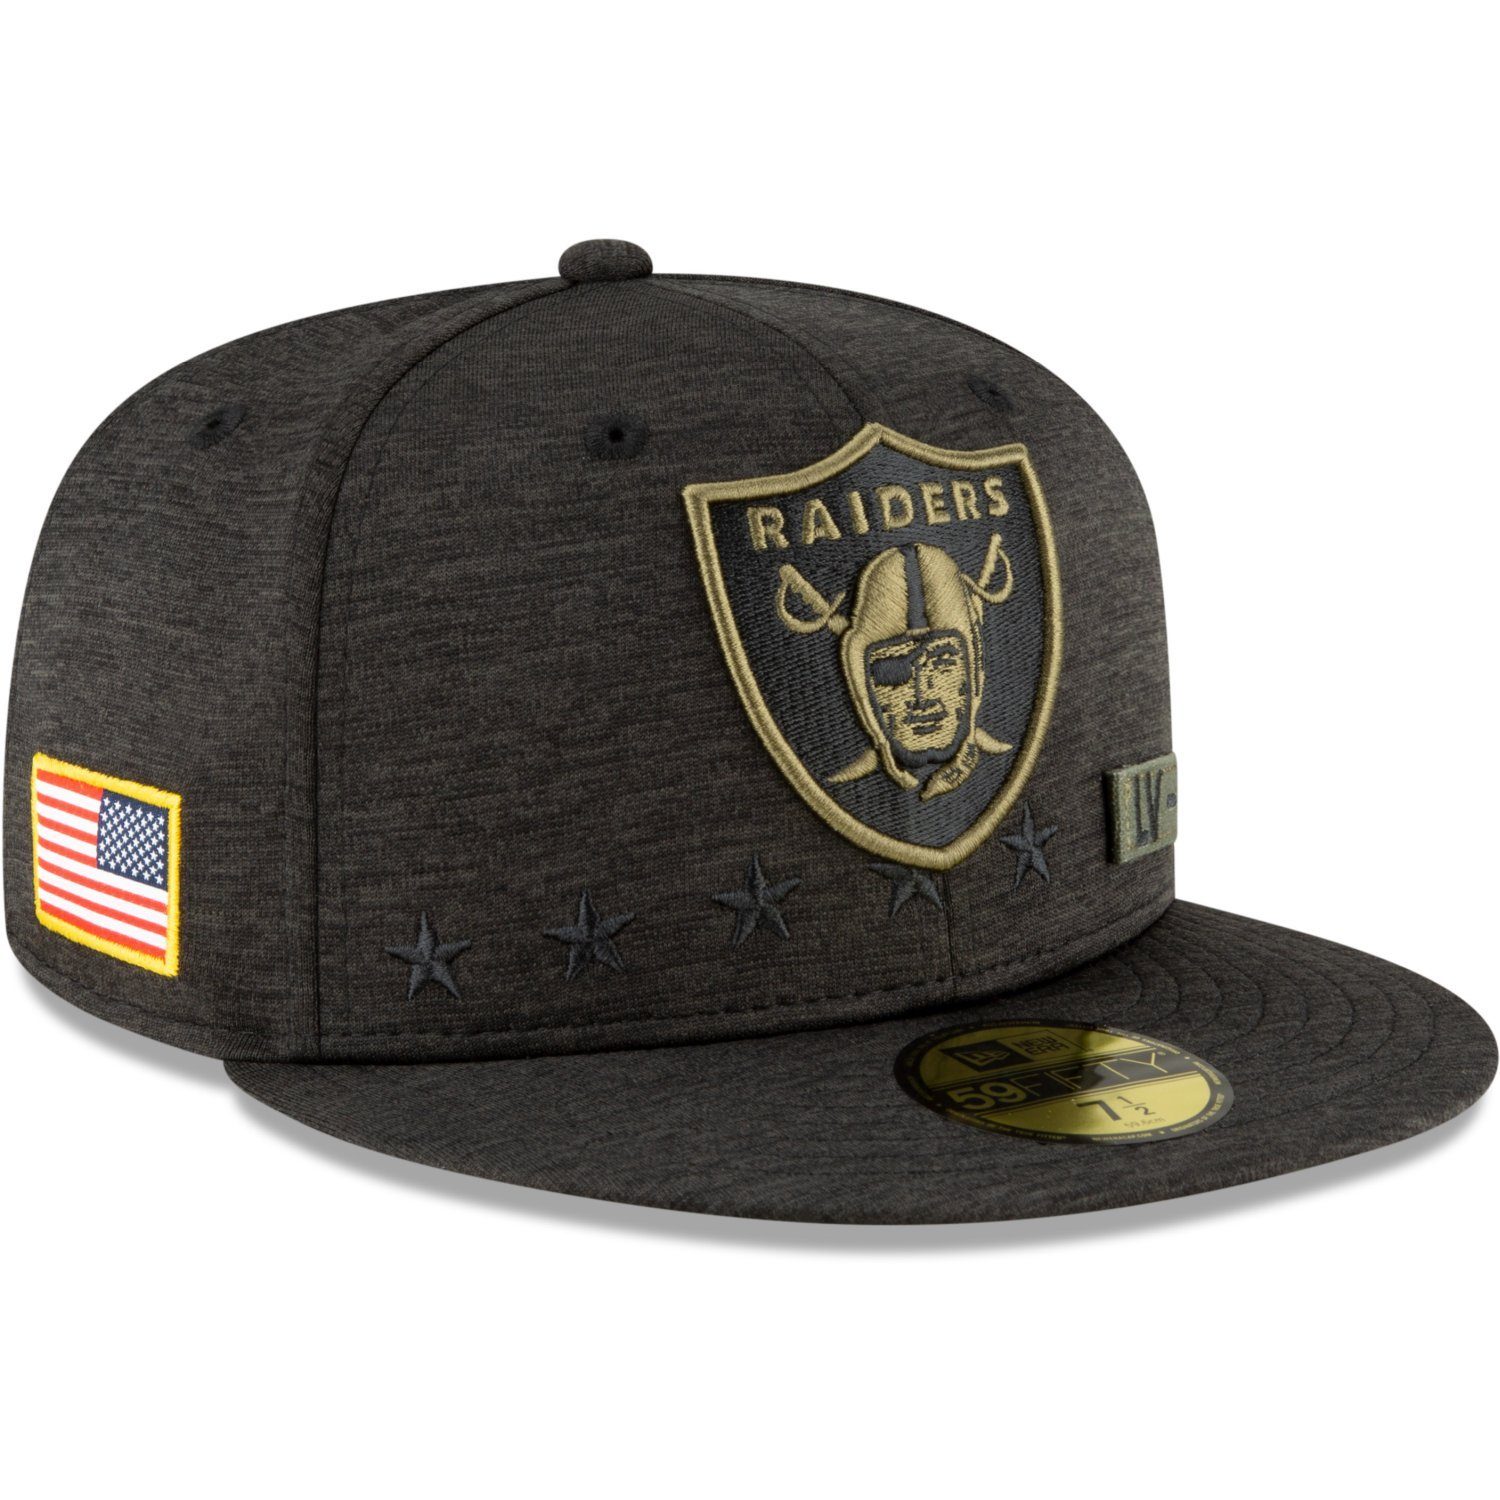 New Era Fitted Vegas 2020 59FIFTY Service Cap Salute Las NFL to Raiders